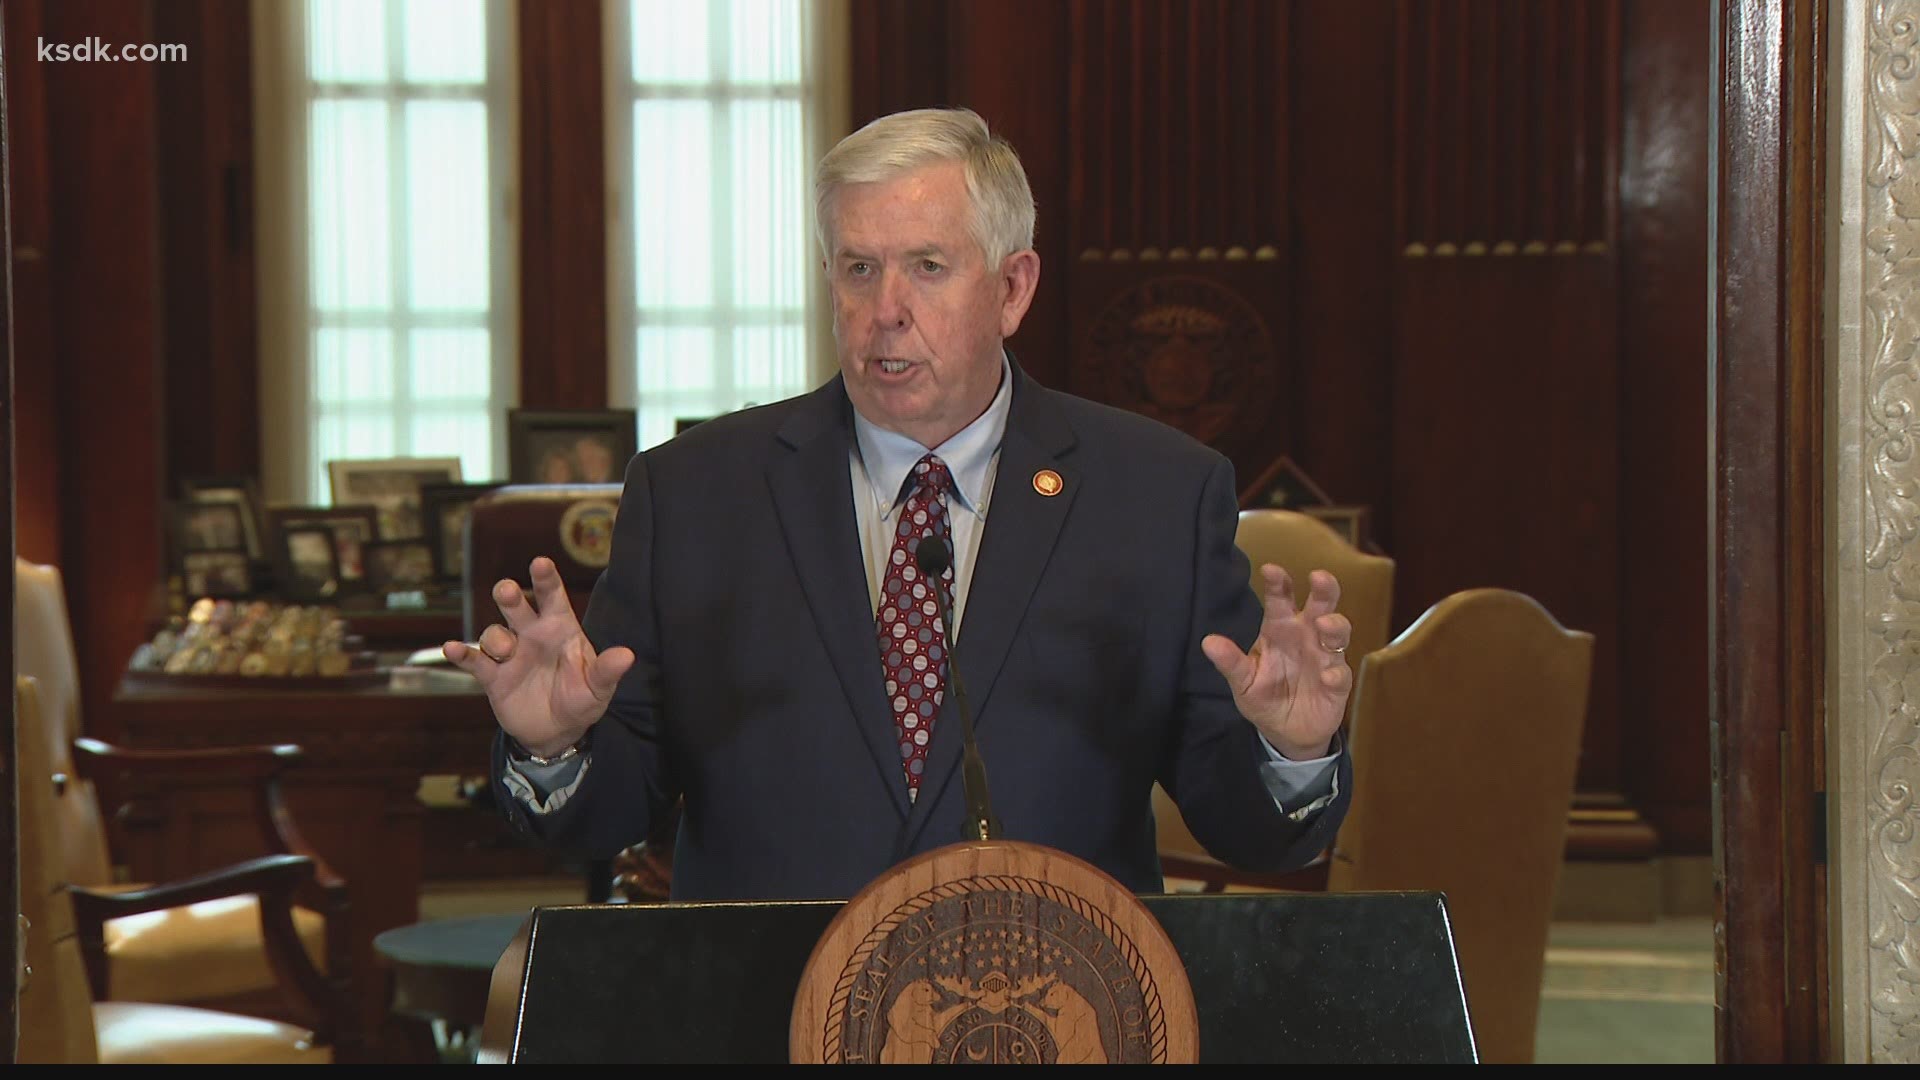 Once the sites are up and running, Gov. Parson said the sites have the capability to provide up to 2,500 doses per day, per team